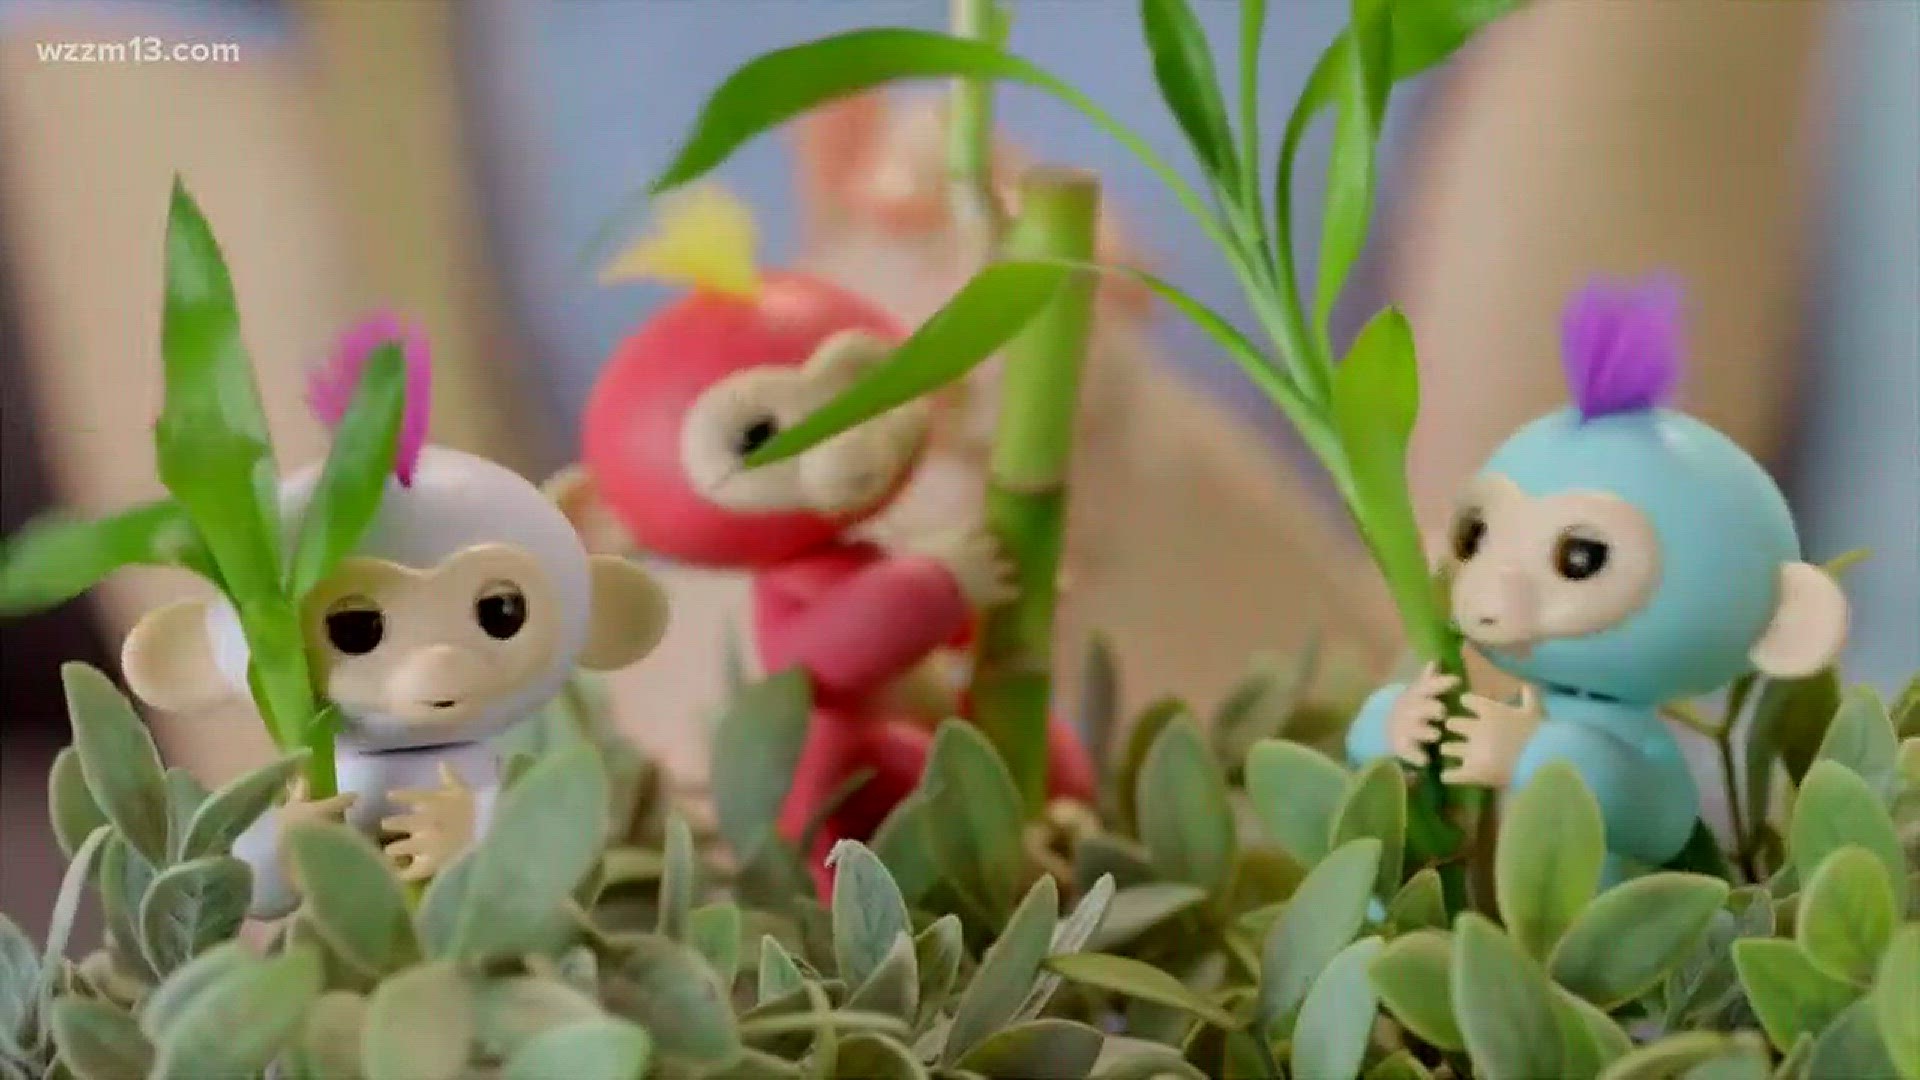 How to avoid buying fake Fingerlings, one of the season's hottest toys